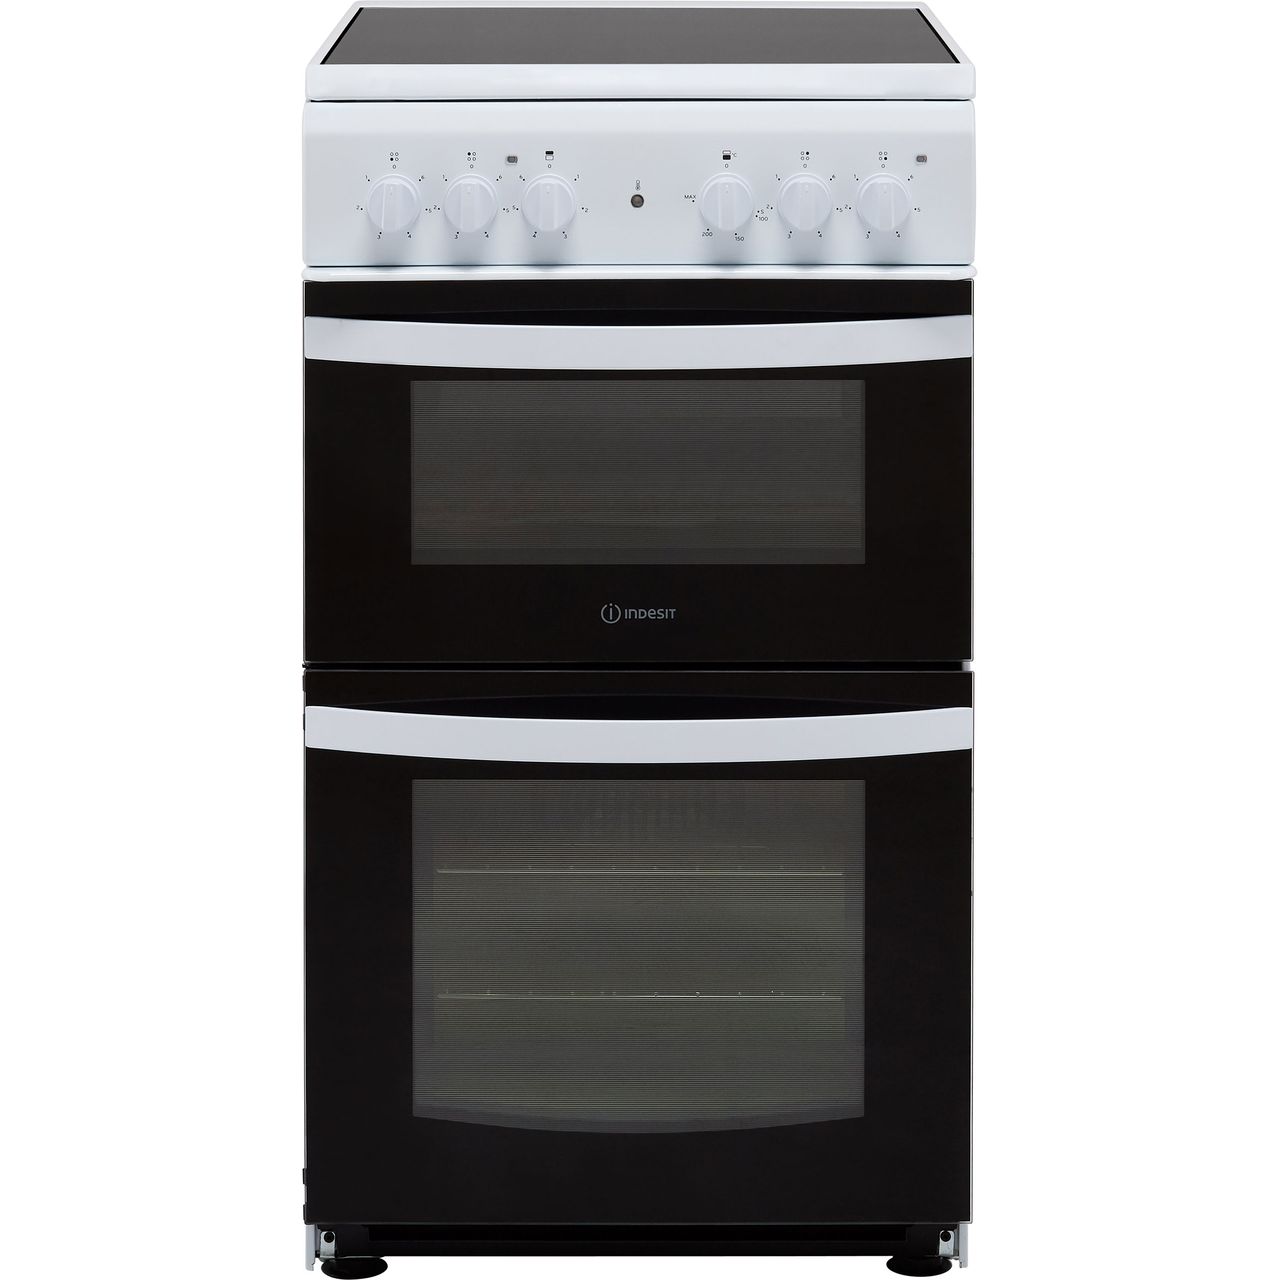 Indesit Cloe ID5V92KMW 50cm Electric Cooker with Ceramic Hob Review